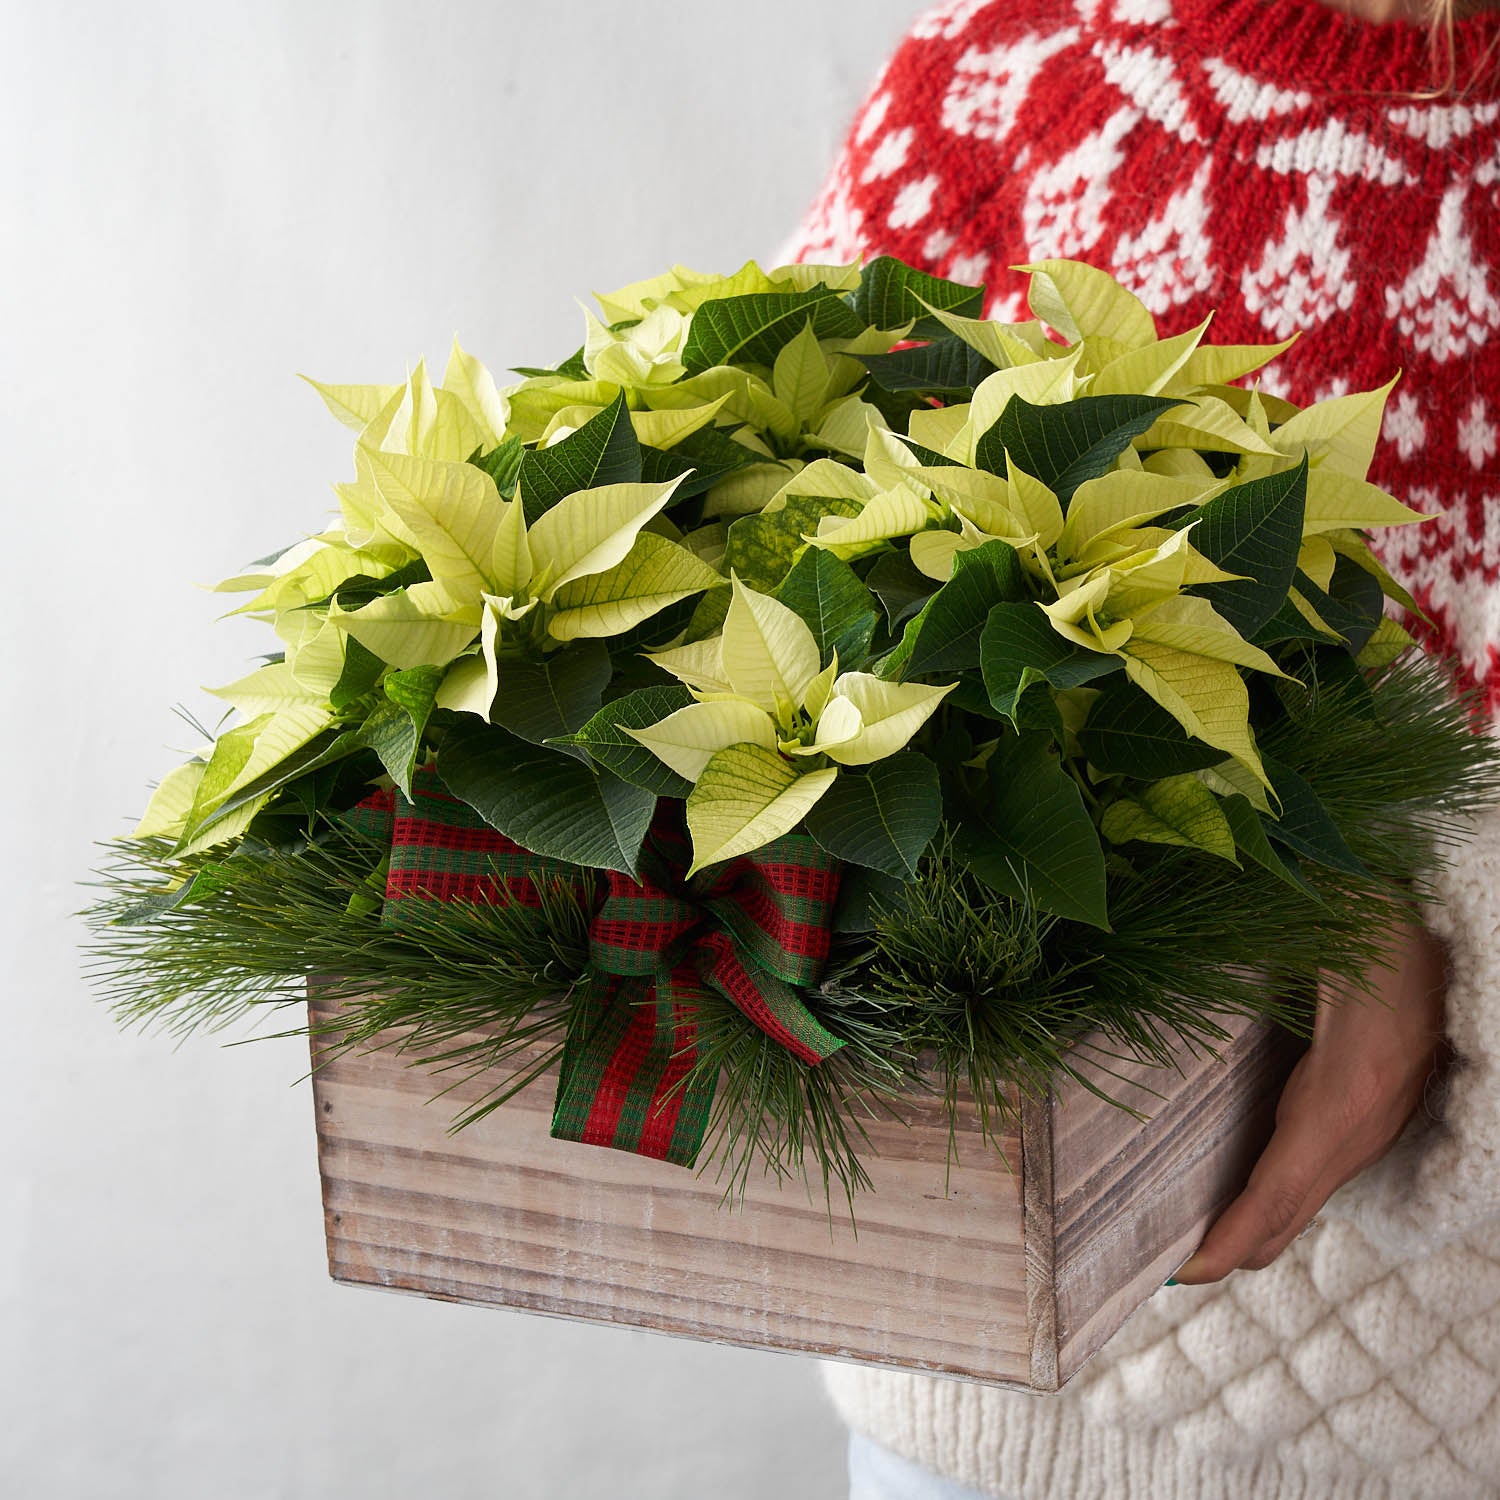 Person in red and white sweater holding wooden box with white poinsettia, pine boughs and red and green bow.